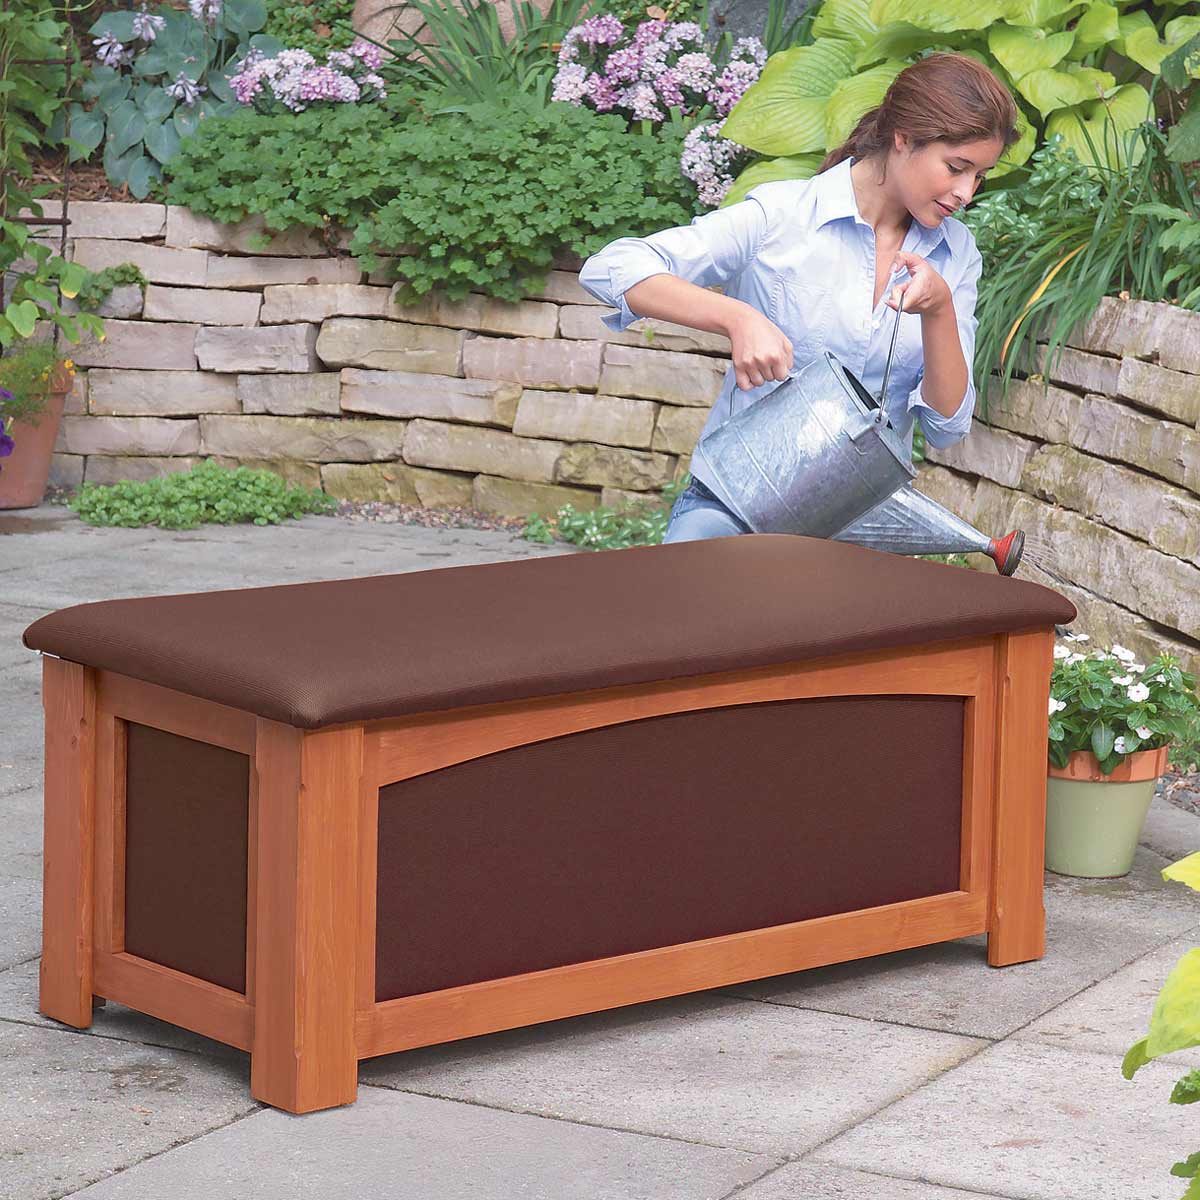 How To Build An Outdoor Storage Bench Seat - Bunnings Australia